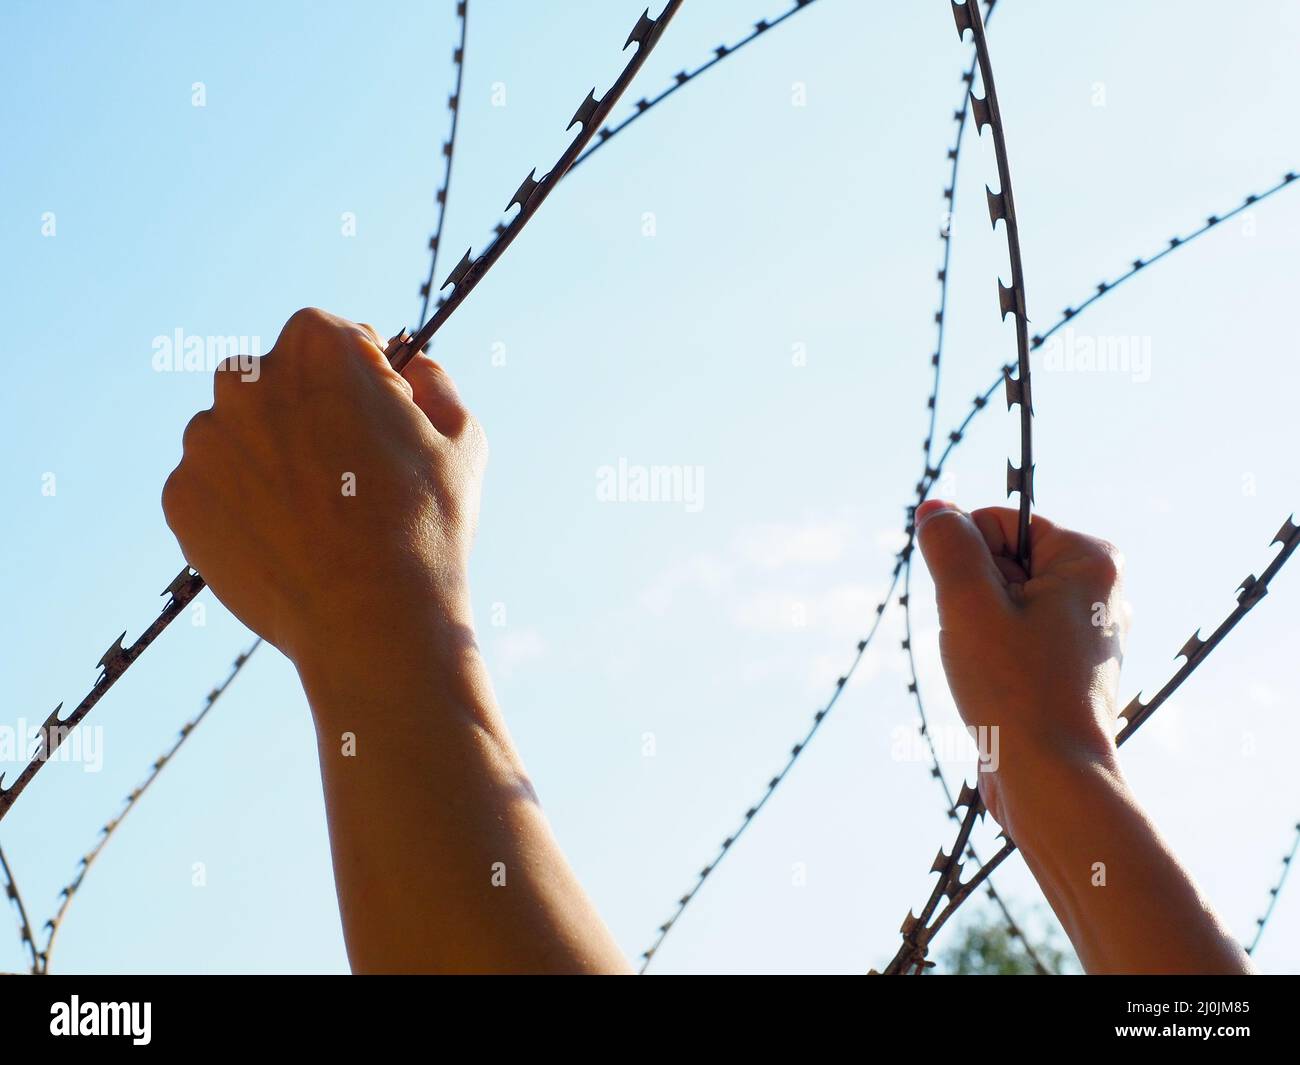 Two hands holding a barbed wire against the blue sky Stock Photo